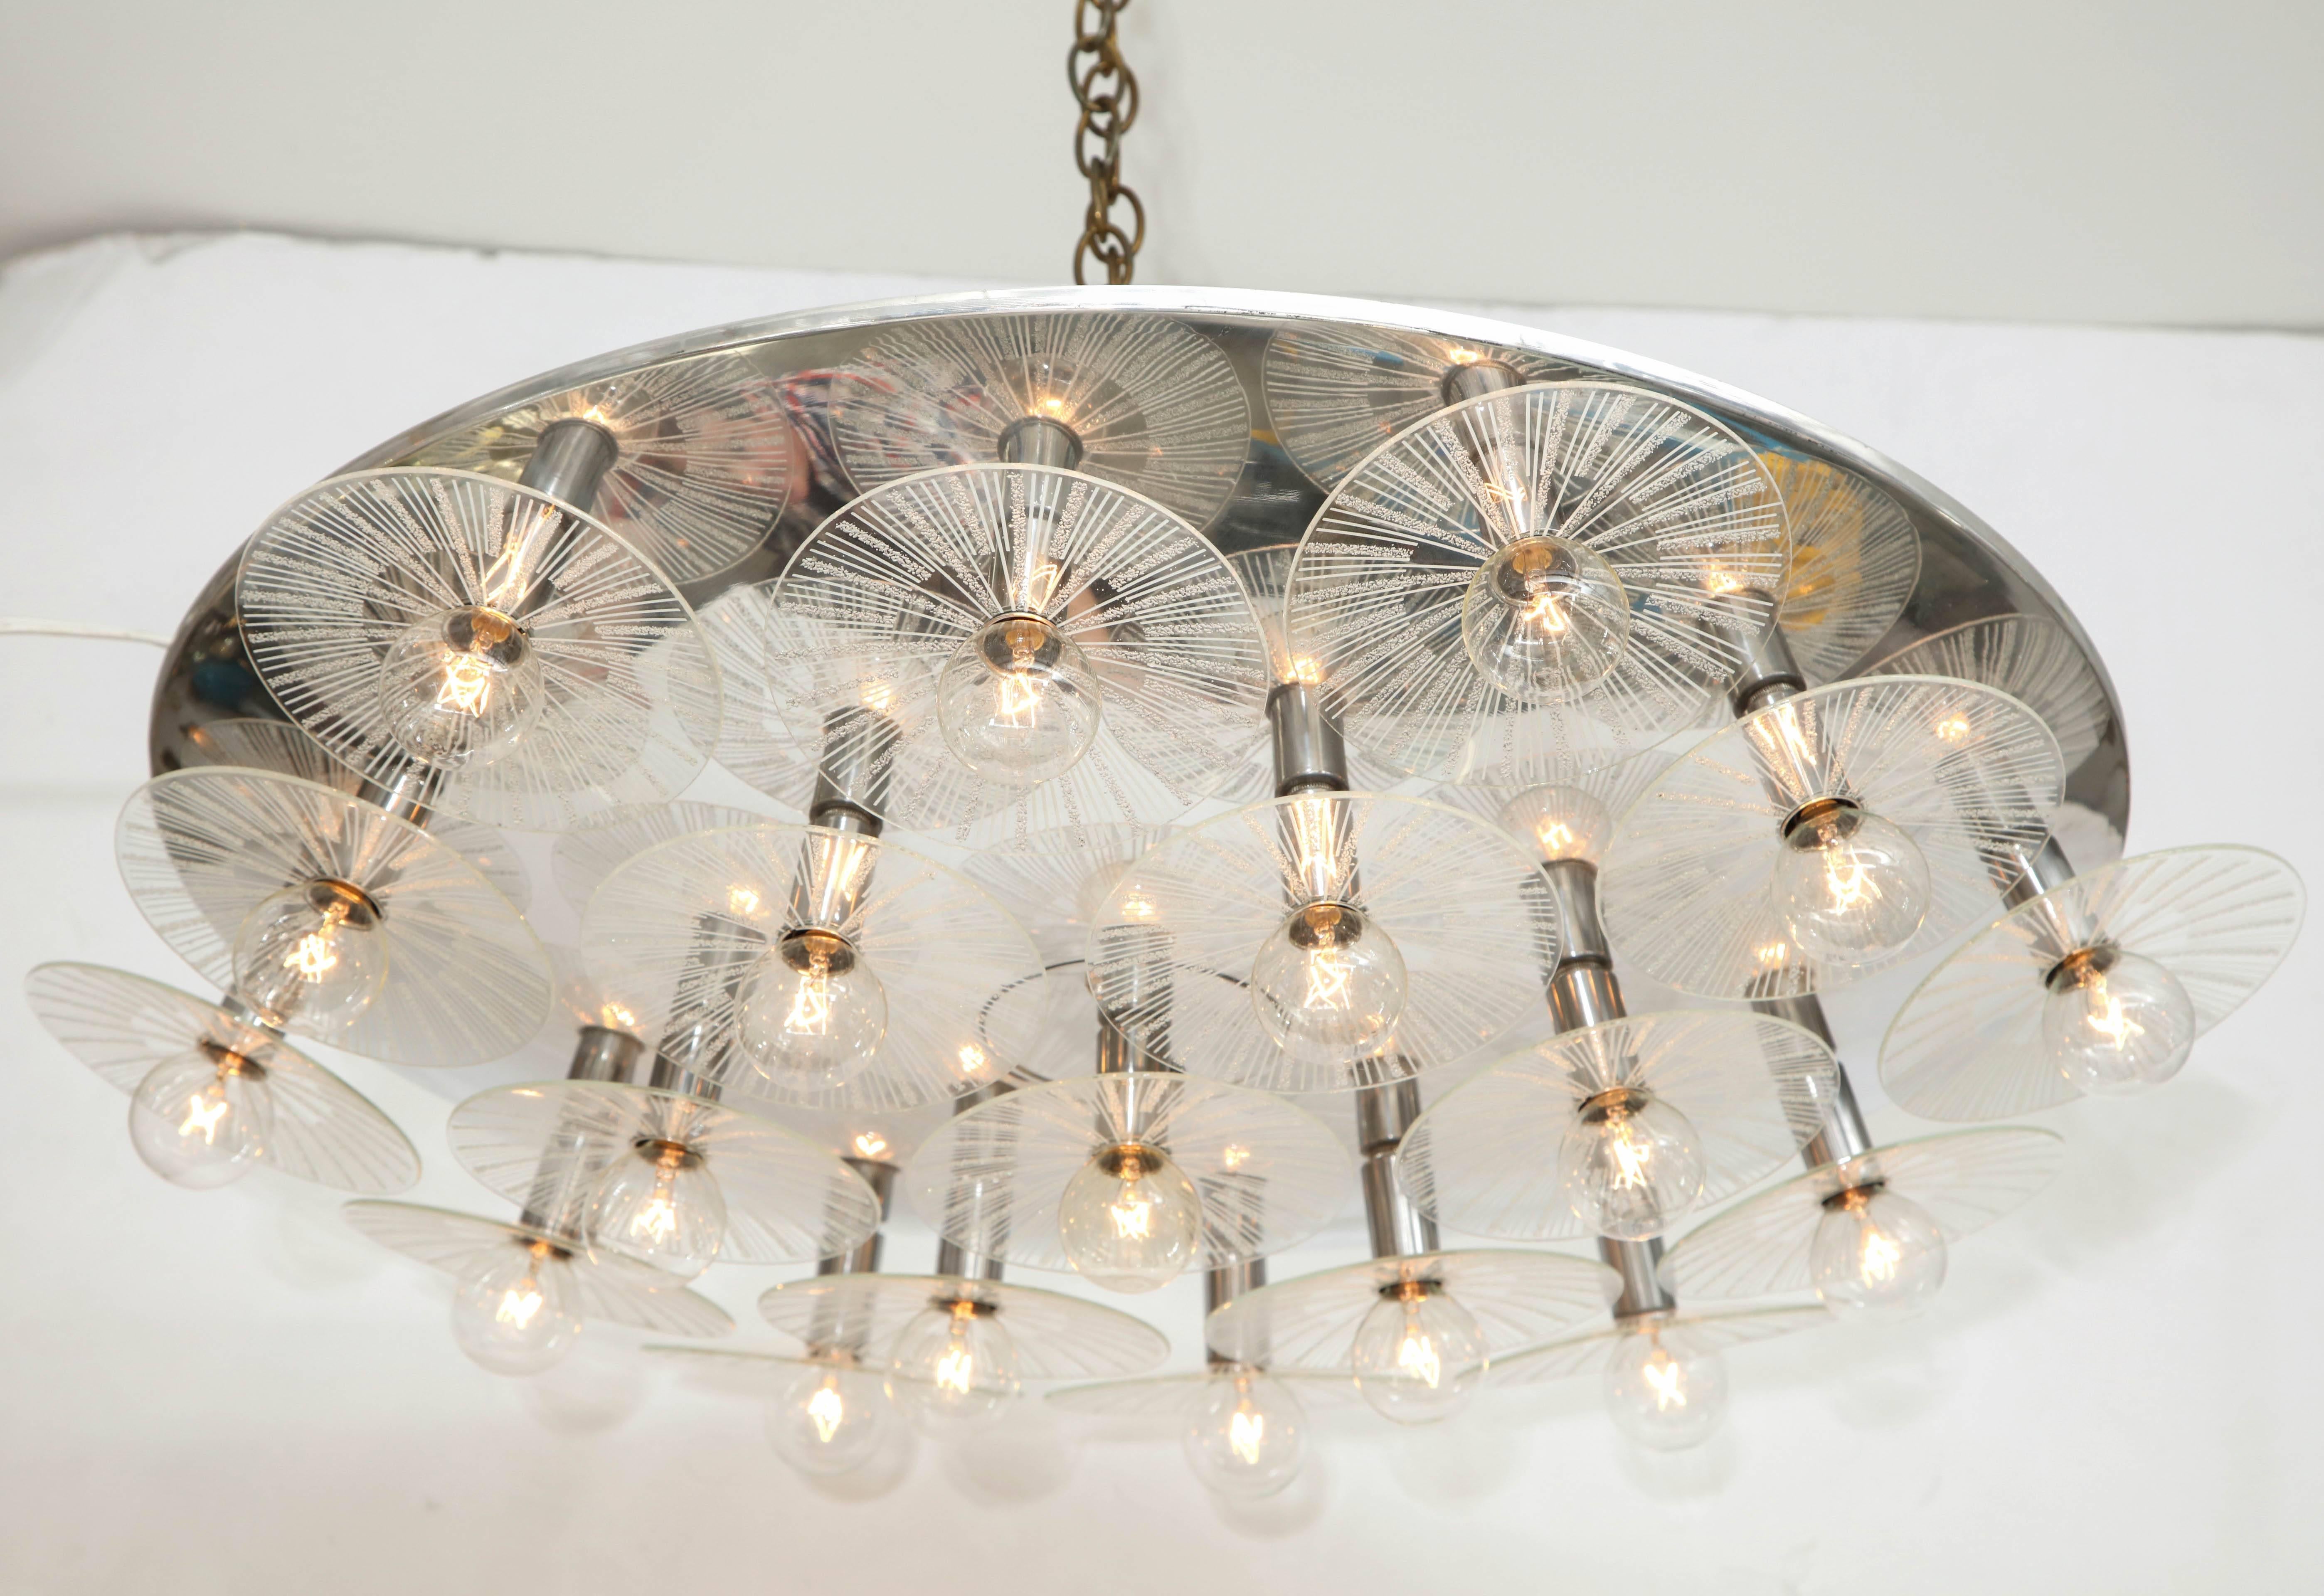 Fabulous, 1970s flush mount / sconce by Lightolier.
The polished chrome armature supports 19 glass disc elements with a radiating pattern each individually illuminated by their own light source.
The fixture has been newly rewired for the US and